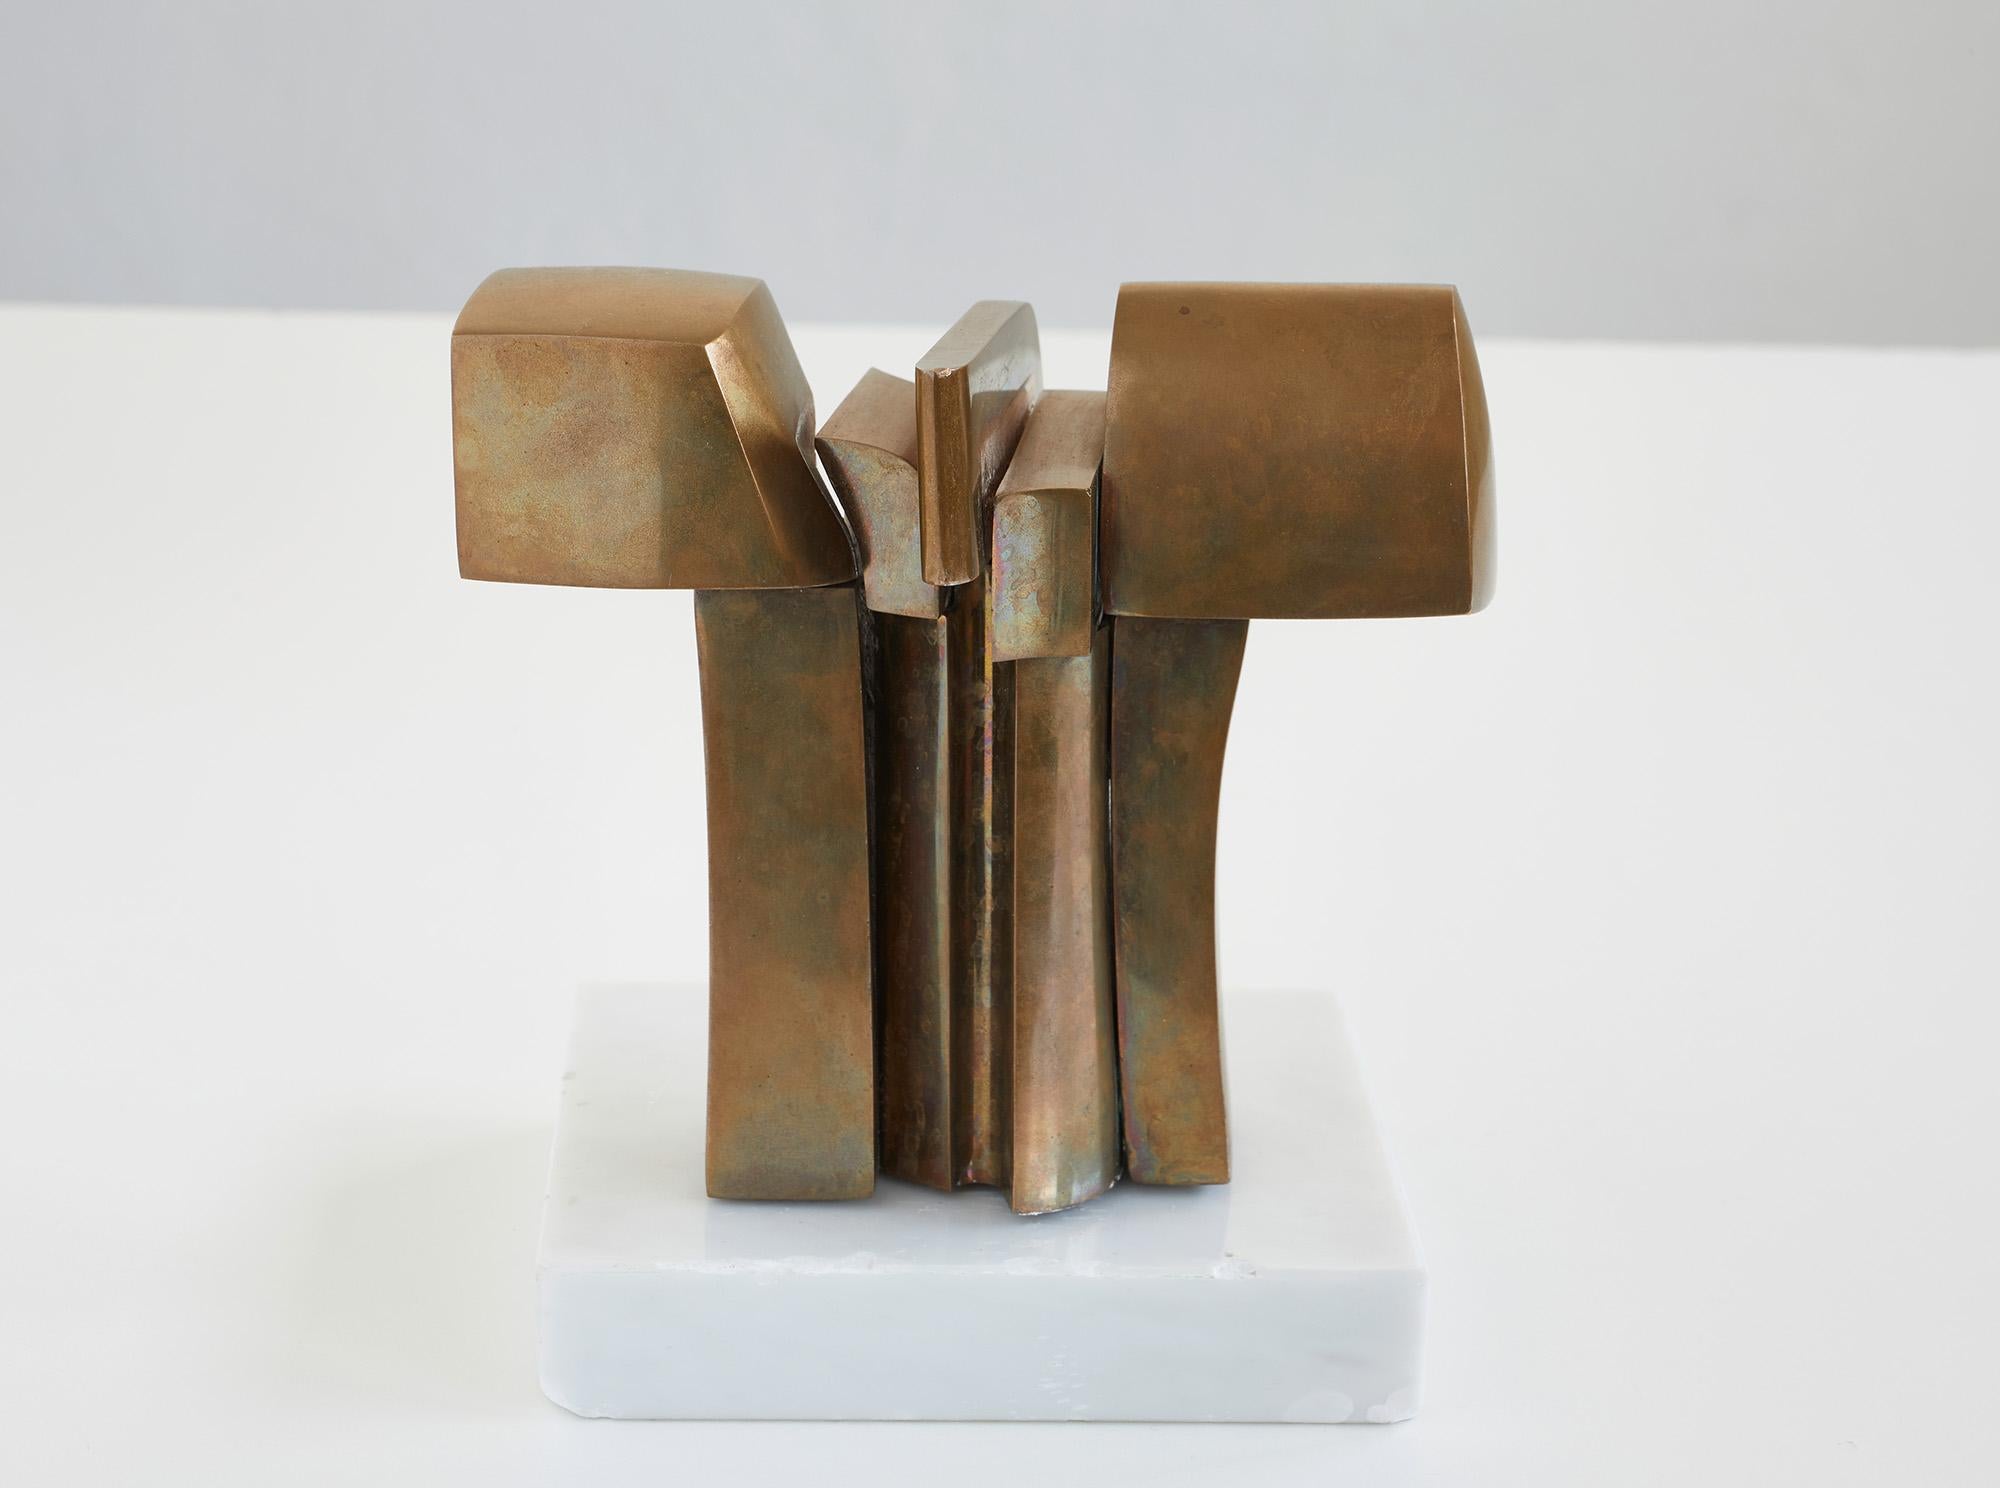 José Luis SANCHEZ (1926-2018)

Untitled Polished bronze sculpture, on a white marble base. 

Signed JL SANCHEZ and numbered 1000 / 884.

Height 18 cm, Length 16 cm  Depth 12 cm

Good condition with a few chips on the base and slight oxidation on the